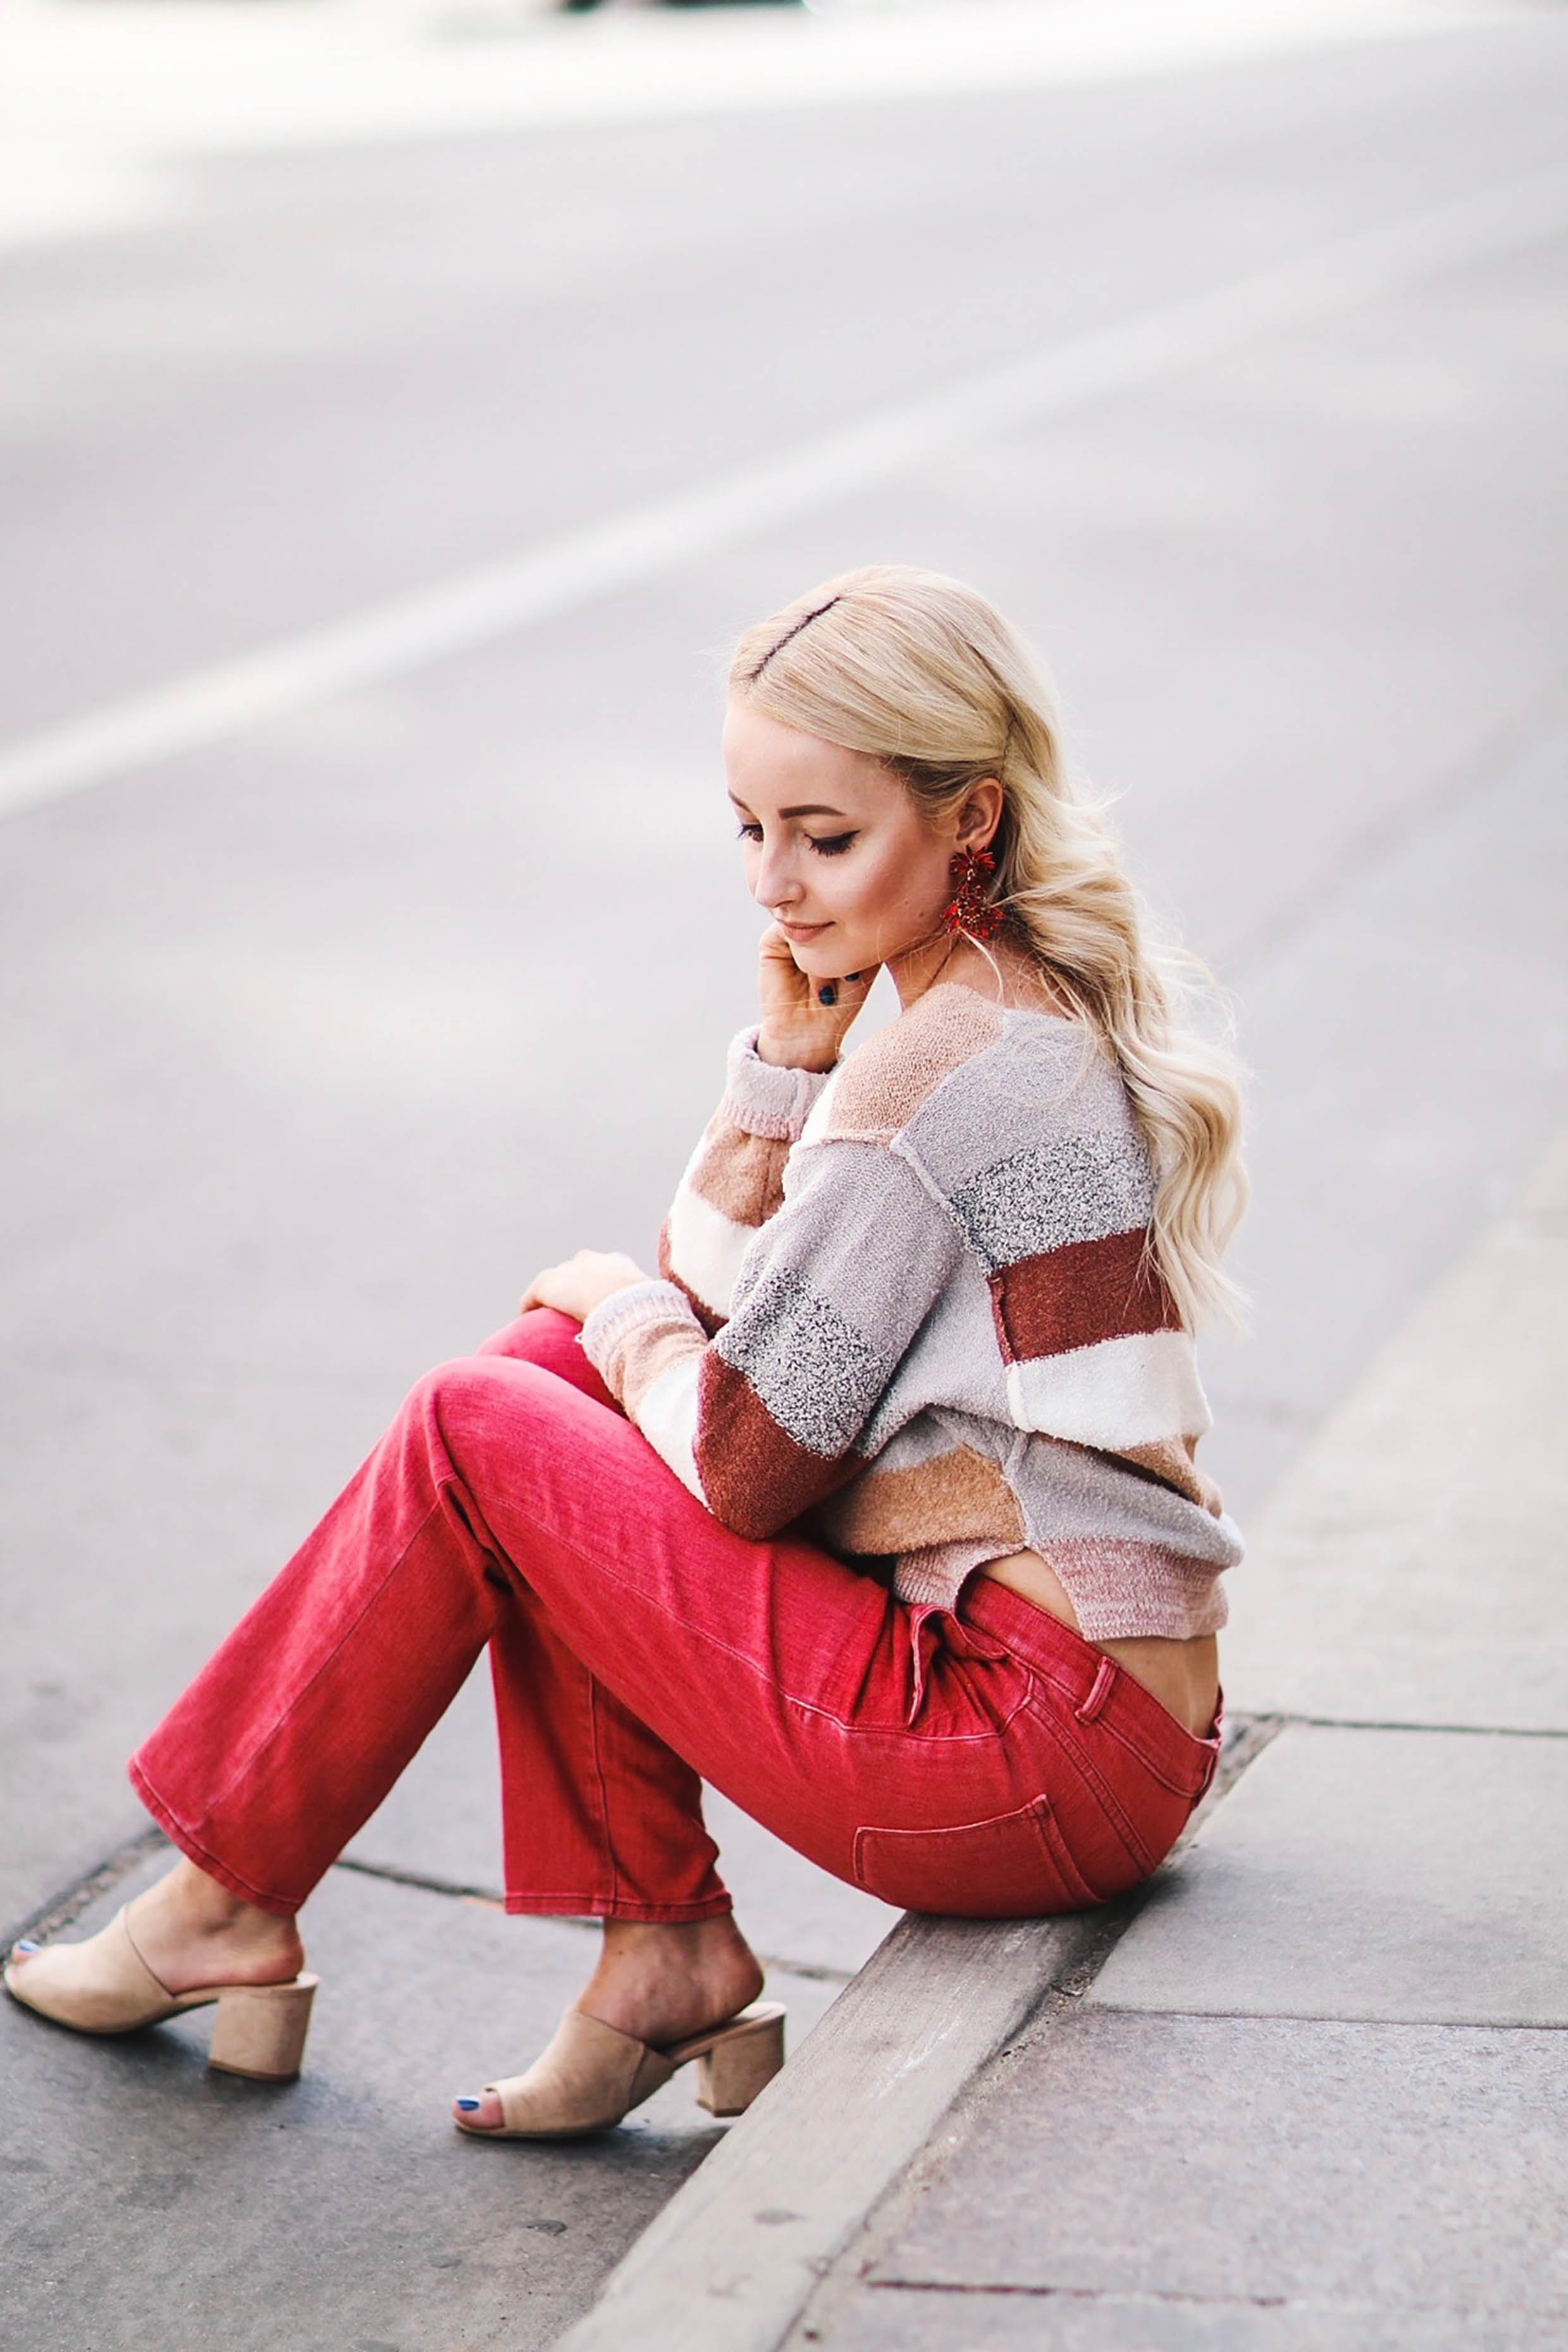 Alena Gidenko of modaprints.com shares tips on styling red jeans and her favorite boutique in Denver, CO